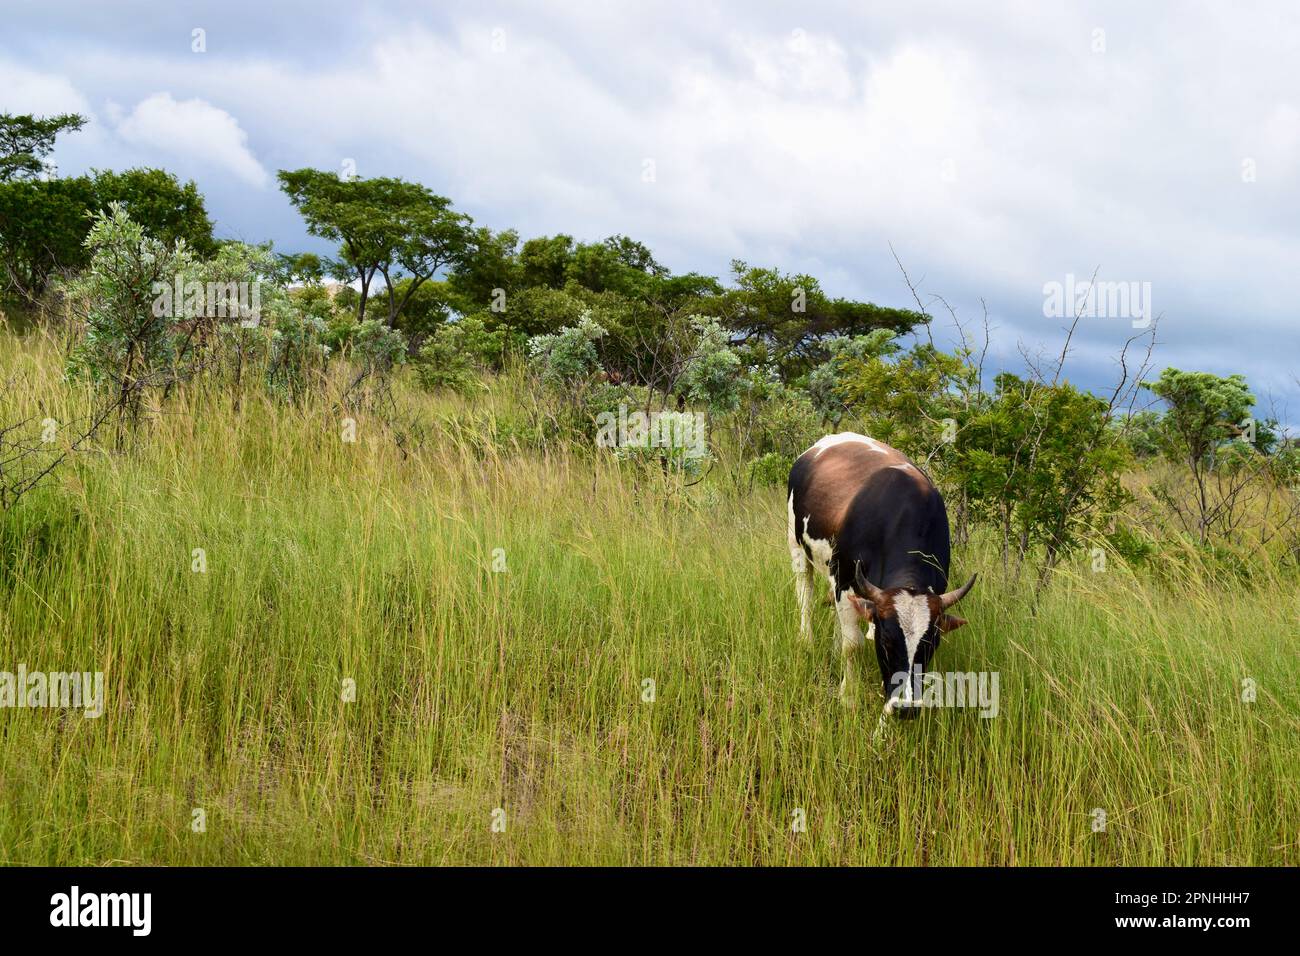 Cow with horns grazing Stock Photo